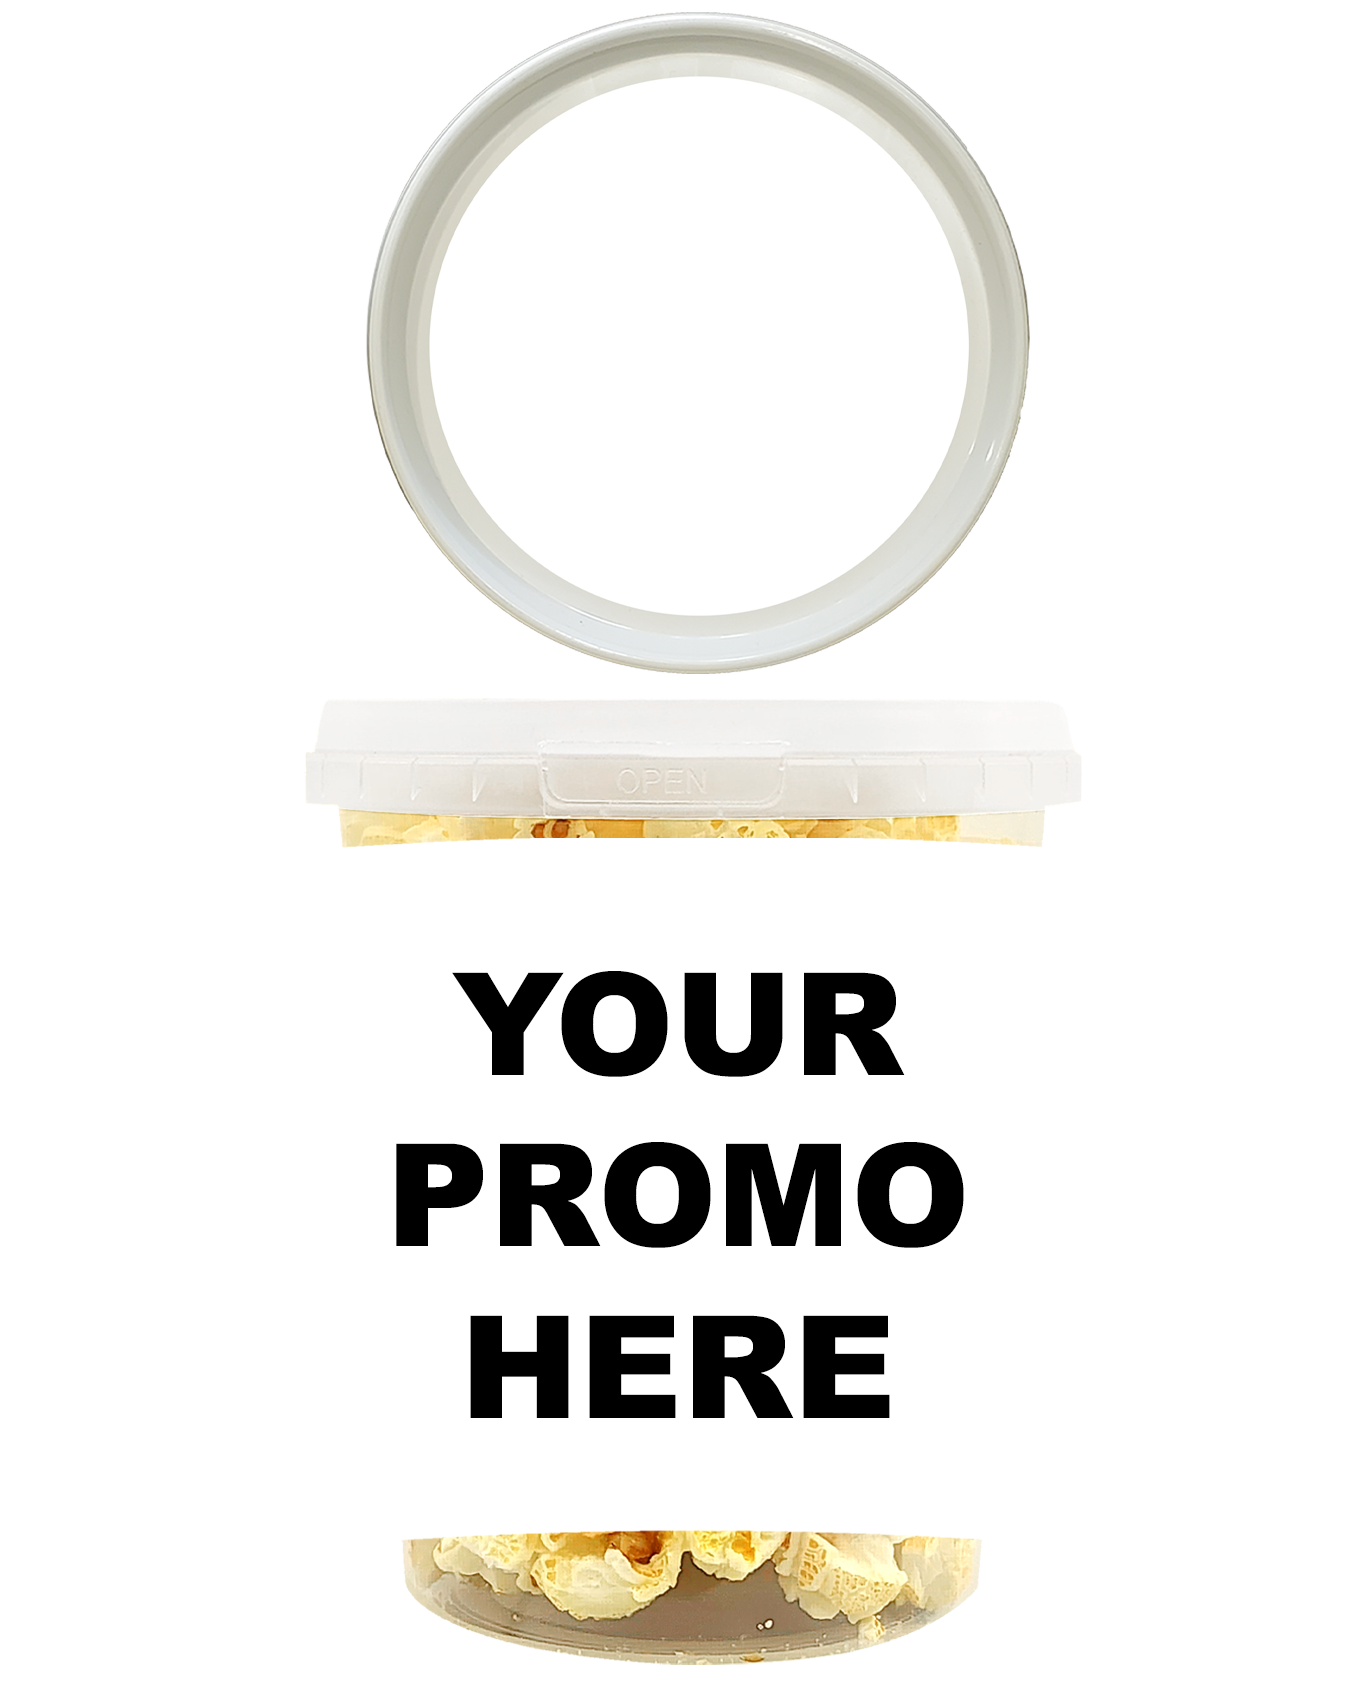 Promo Pop™ - Simply Salted Classic (as low as $3.49 per bucket) Case of 12 Price